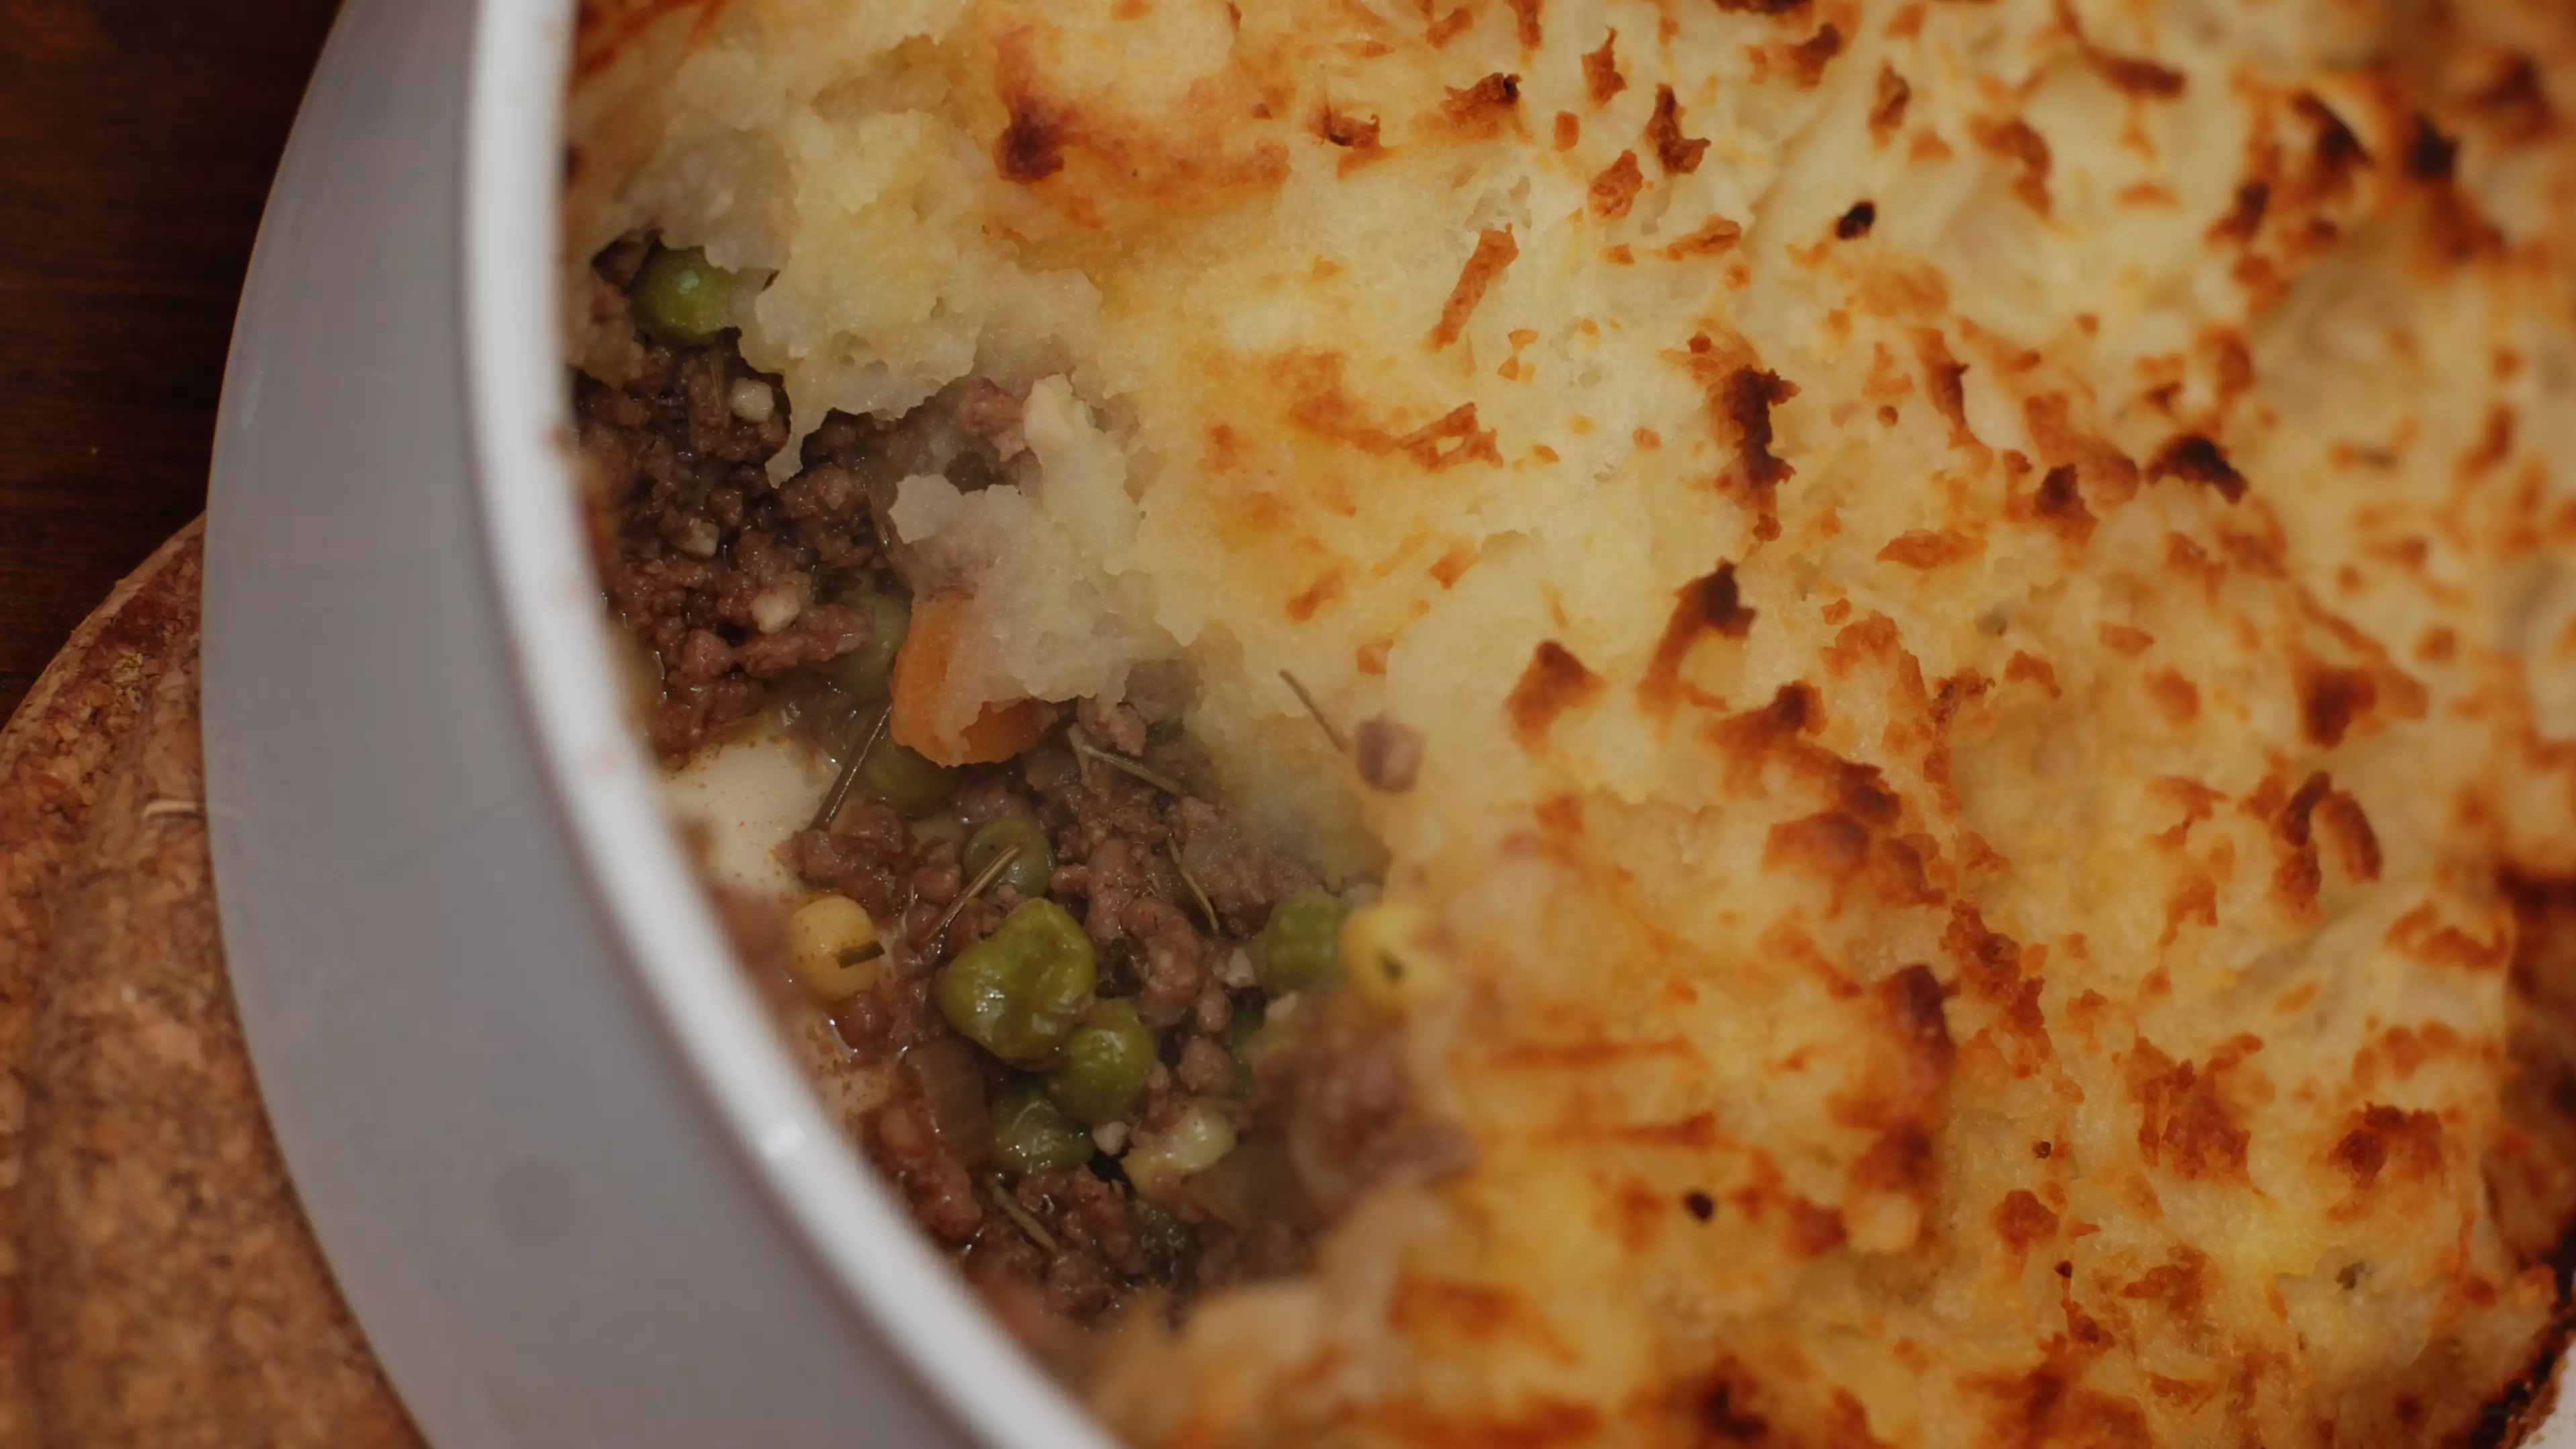 Woman Complains Her Cottage Pie Was Burnt - After Putting It In The Microwave For 45 Minutes​